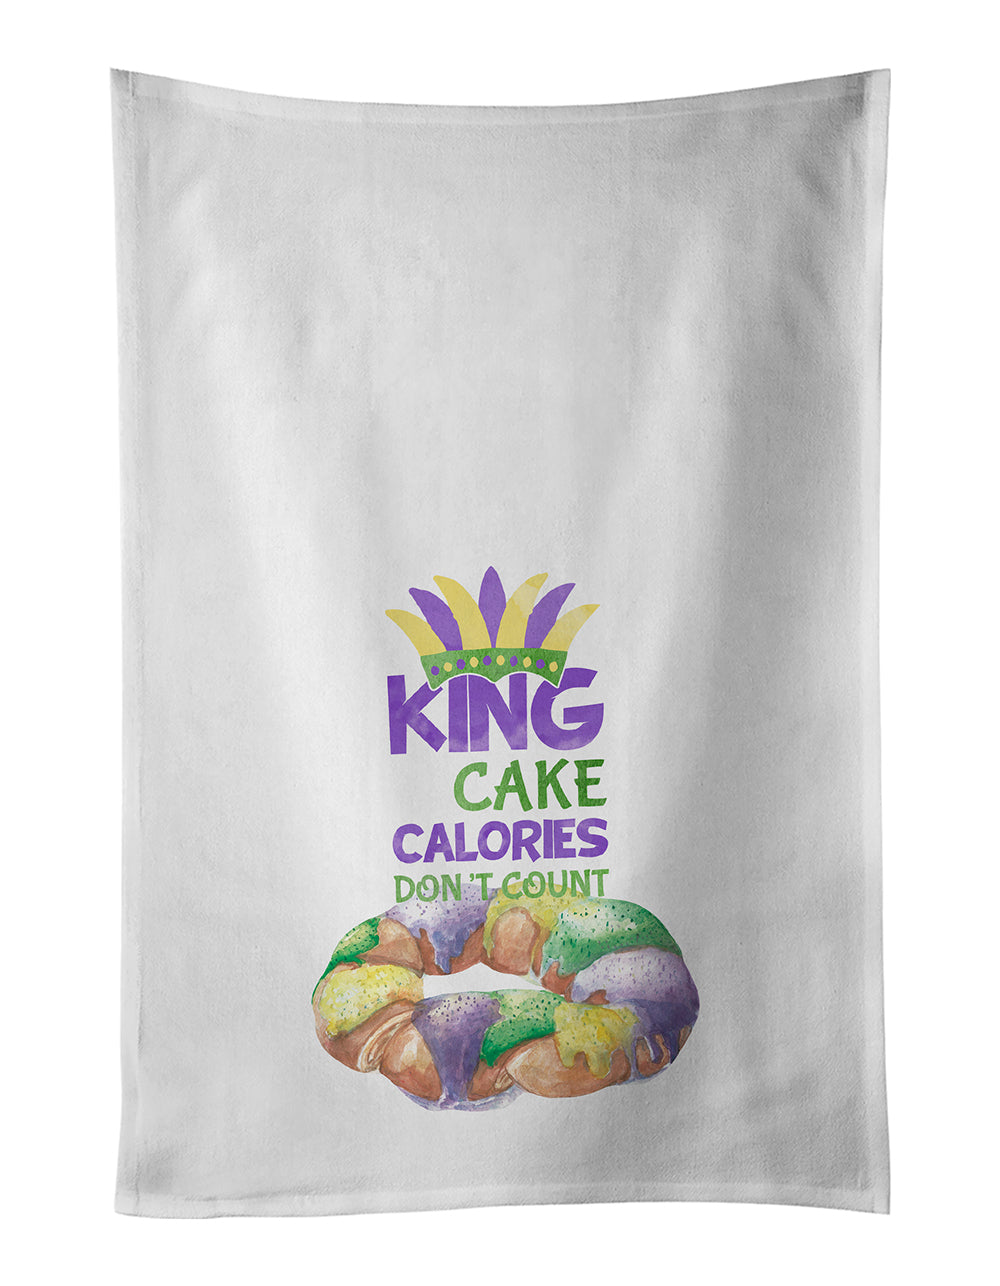 Buy this King Cake Calories Don't Count Mardi Gras White Kitchen Towel Set of 2 Dish Towels